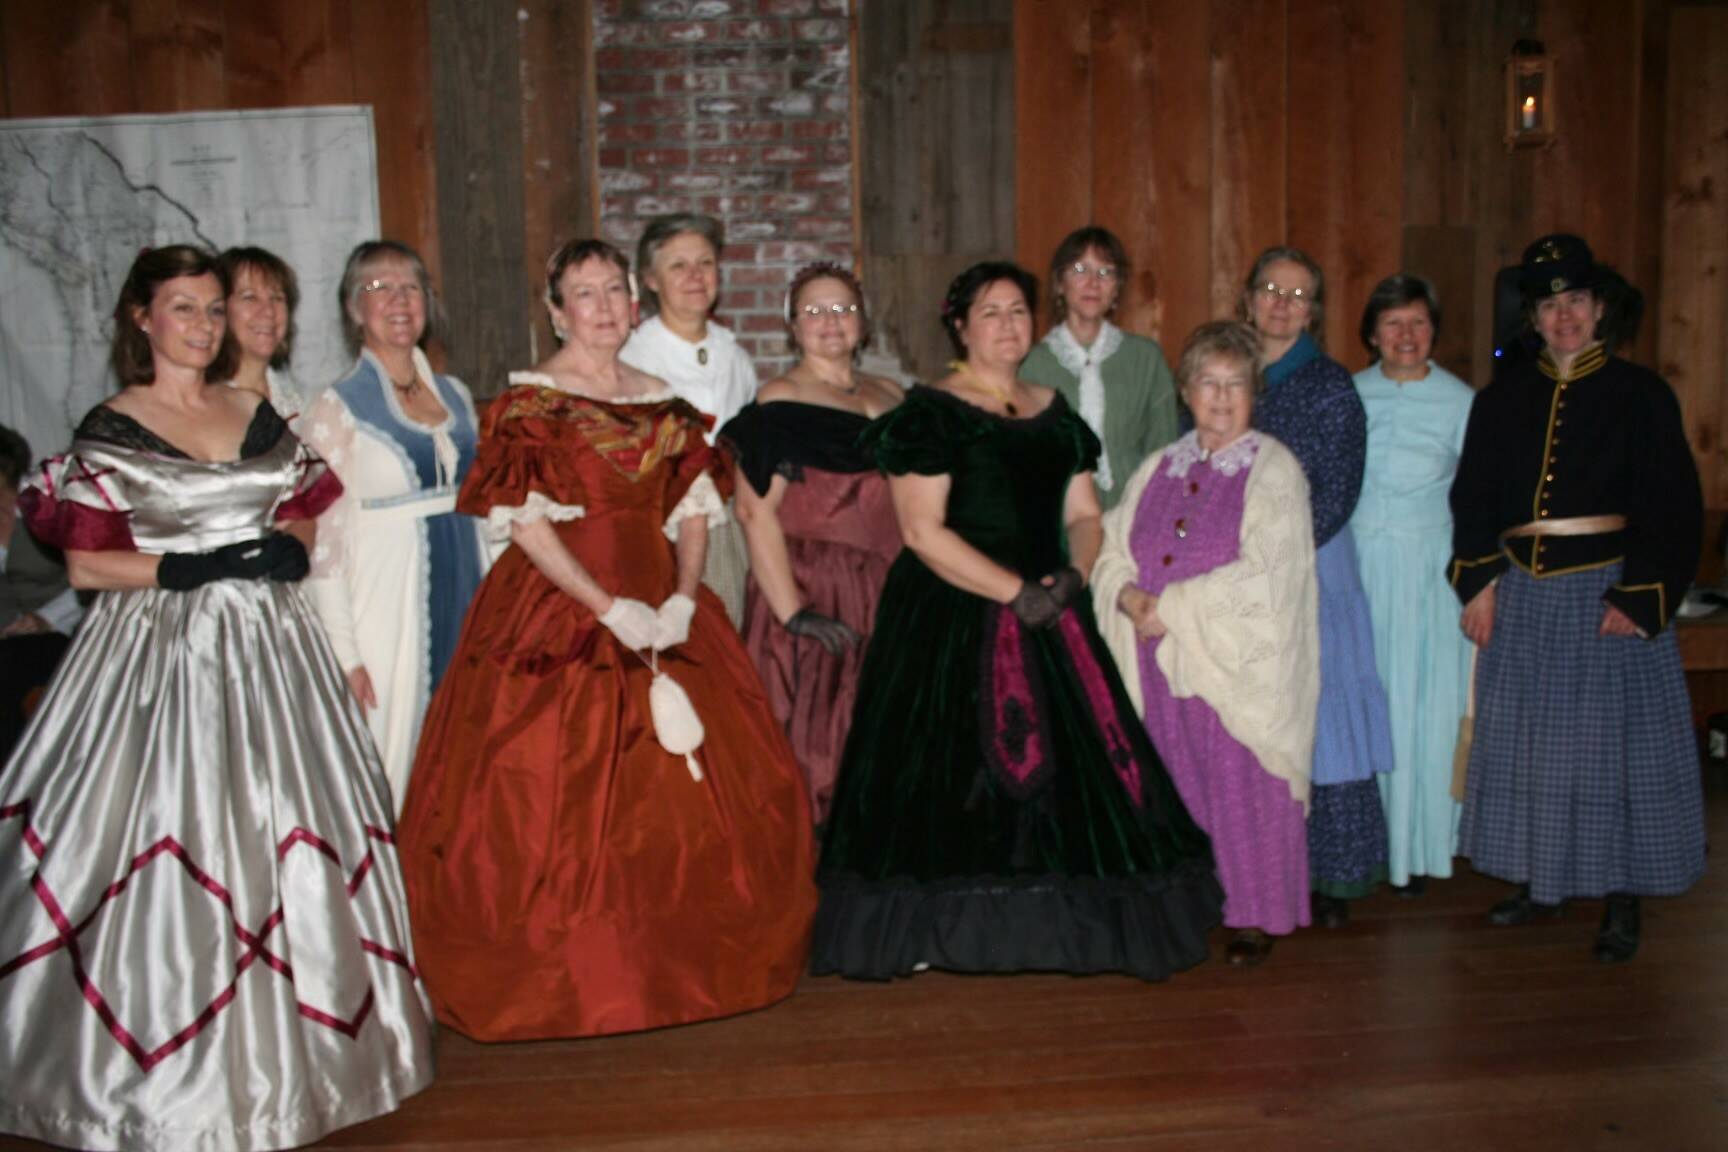 Photo by Mike Vouri: The first Candlelight Ball in 2000.